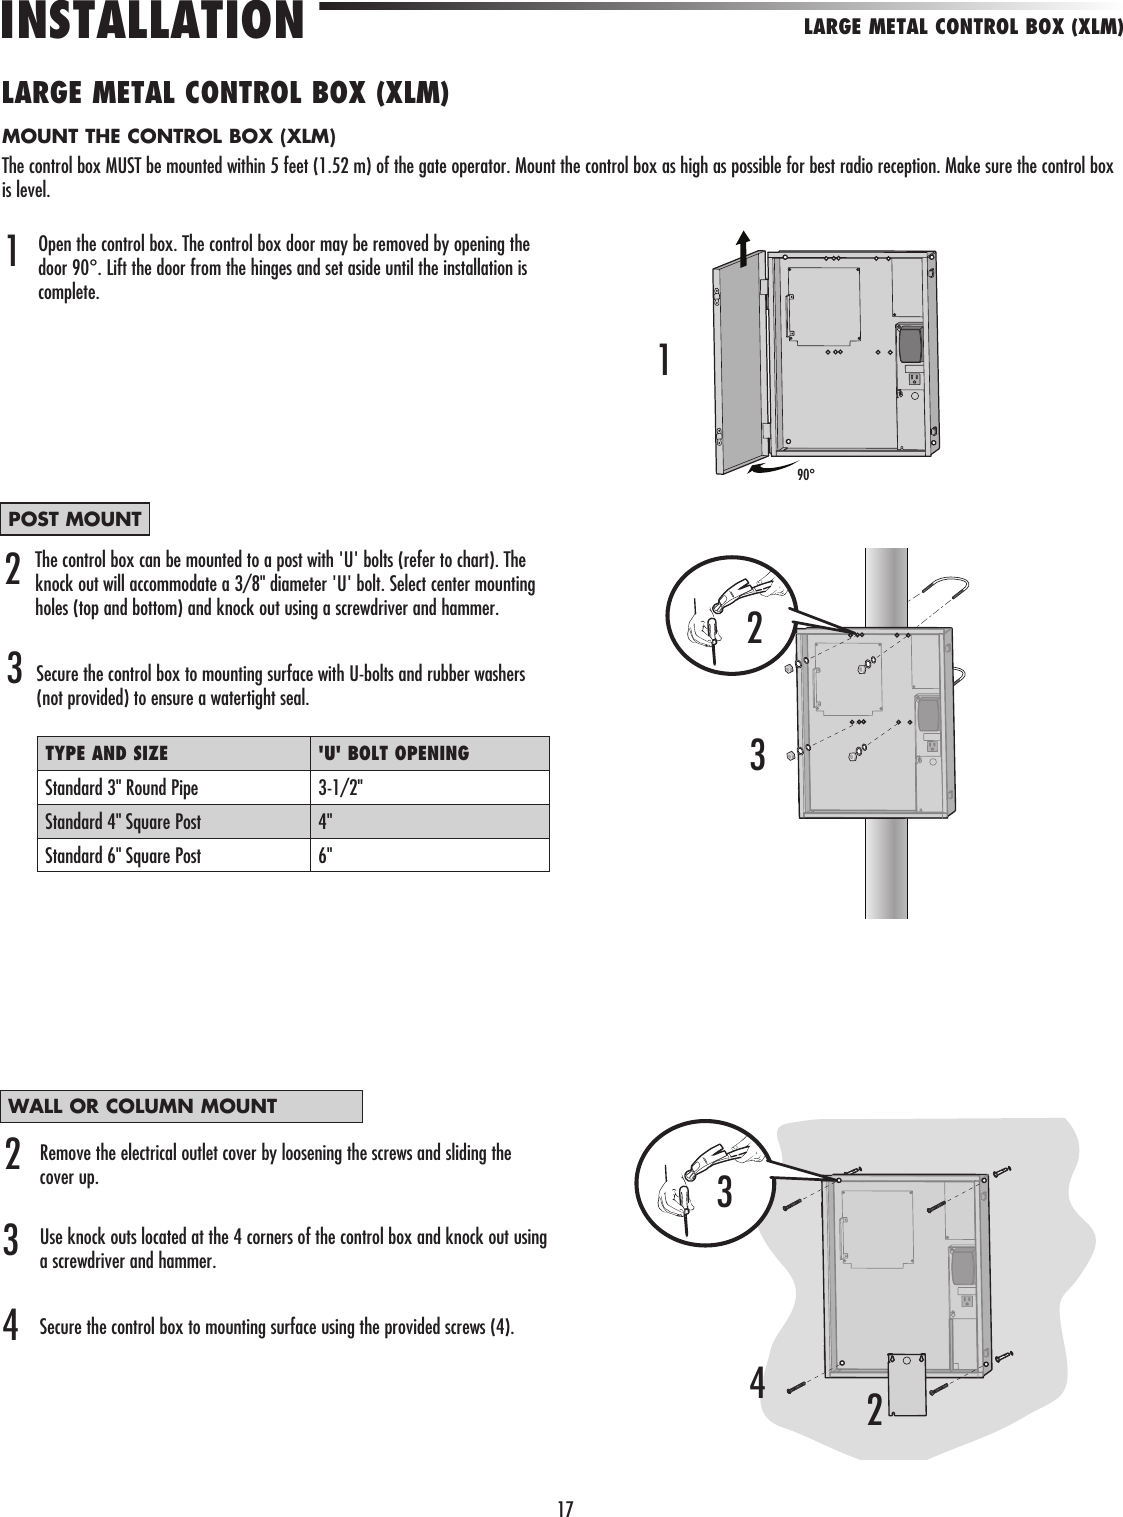 17The control box can be mounted to a post with &apos;U&apos; bolts (refer to chart). The knock out will accommodate a 3/8&quot; diameter &apos;U&apos; bolt. Select center mounting holes (top and bottom) and knock out using a screwdriver and hammer.Secure the control box to mounting surface with U-bolts and rubber washers (not provided) to ensure a watertight seal. LARGE METAL CONTROL BOX (XLM)INSTALLATIONLARGE METAL CONTROL BOX (XLM)Open the control box. The control box door may be removed by opening the door 90°. Lift the door from the hinges and set aside until the installation is complete.122132Remove the electrical outlet cover by loosening the screws and sliding the cover up.Use knock outs located at the 4 corners of the control box and knock out using a screwdriver and hammer.Secure the control box to mounting surface using the provided screws (4).TYPE AND SIZE &apos;U&apos; BOLT OPENINGStandard 3&quot; Round Pipe 3-1/2&quot;Standard 4&quot; Square Post 4&quot;Standard 6&quot; Square Post 6&quot;3MOUNT THE CONTROL BOX (XLM)The control box MUST be mounted within 5 feet (1.52 m) of the gate operator. Mount the control box as high as possible for best radio reception. Make sure the control box is level.POST MOUNTWALL OR COLUMN MOUNT3490°324